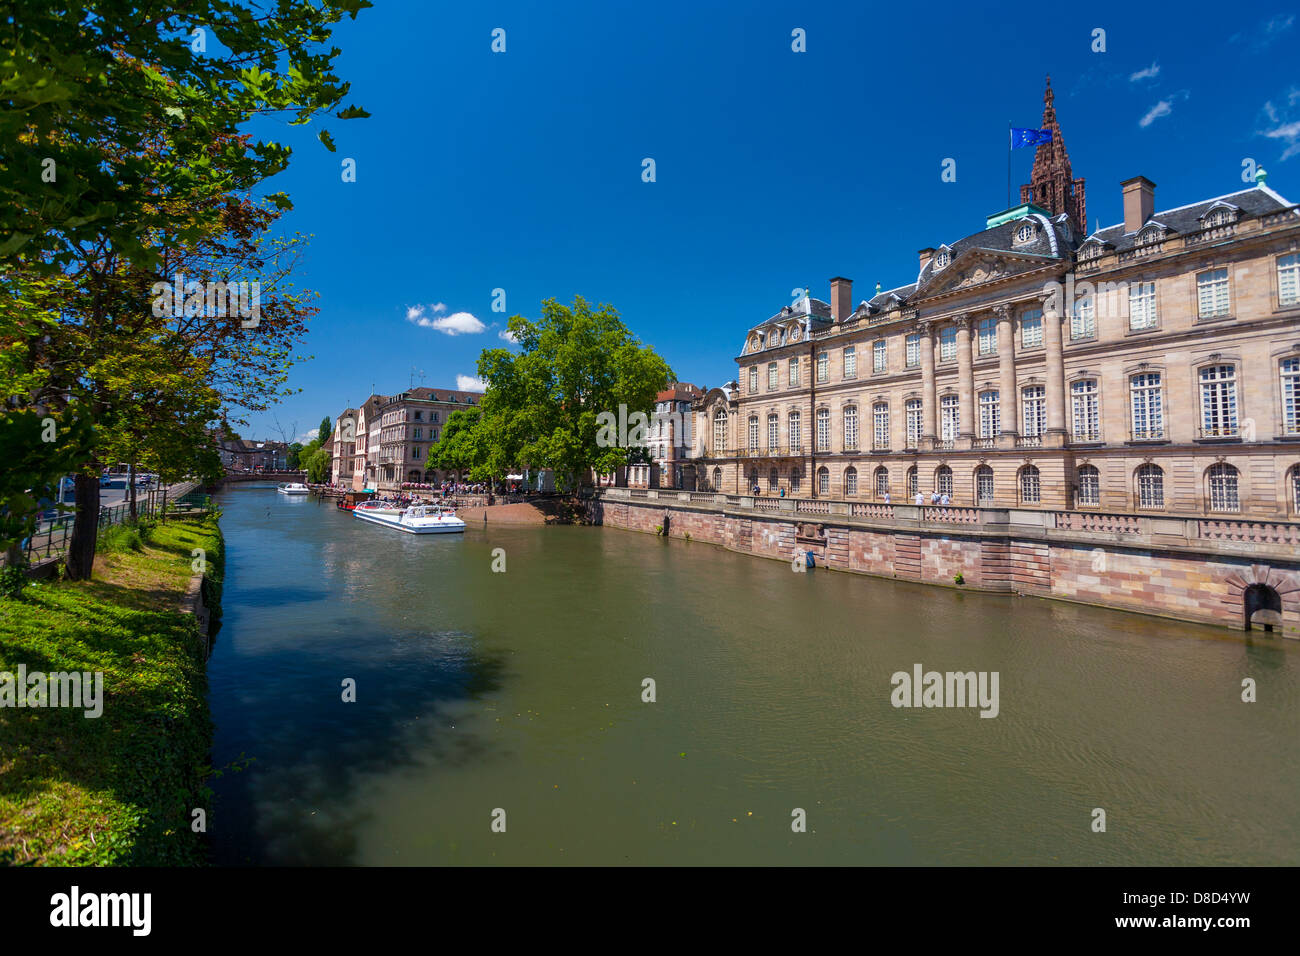 Palais Rohan / Rohan palace on the river Ill Strasbourg, Alsace, France, Europe Stock Photo